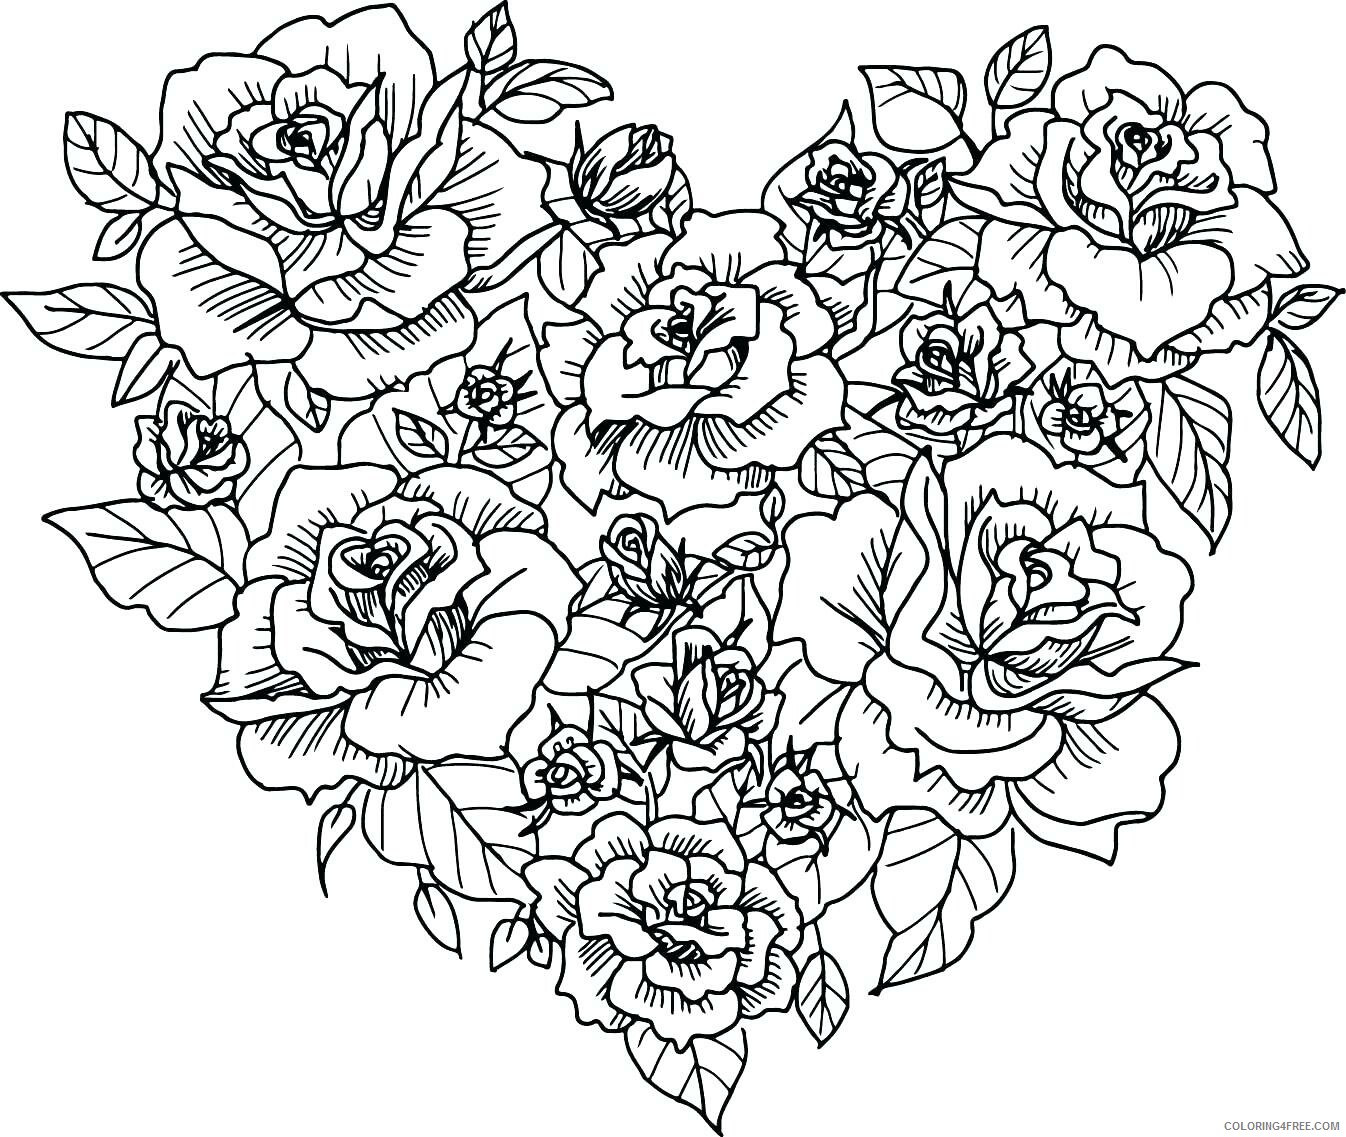 Rose and Heart Coloring Pages Heart Made of Roses Printable 2021 5112 Coloring4free